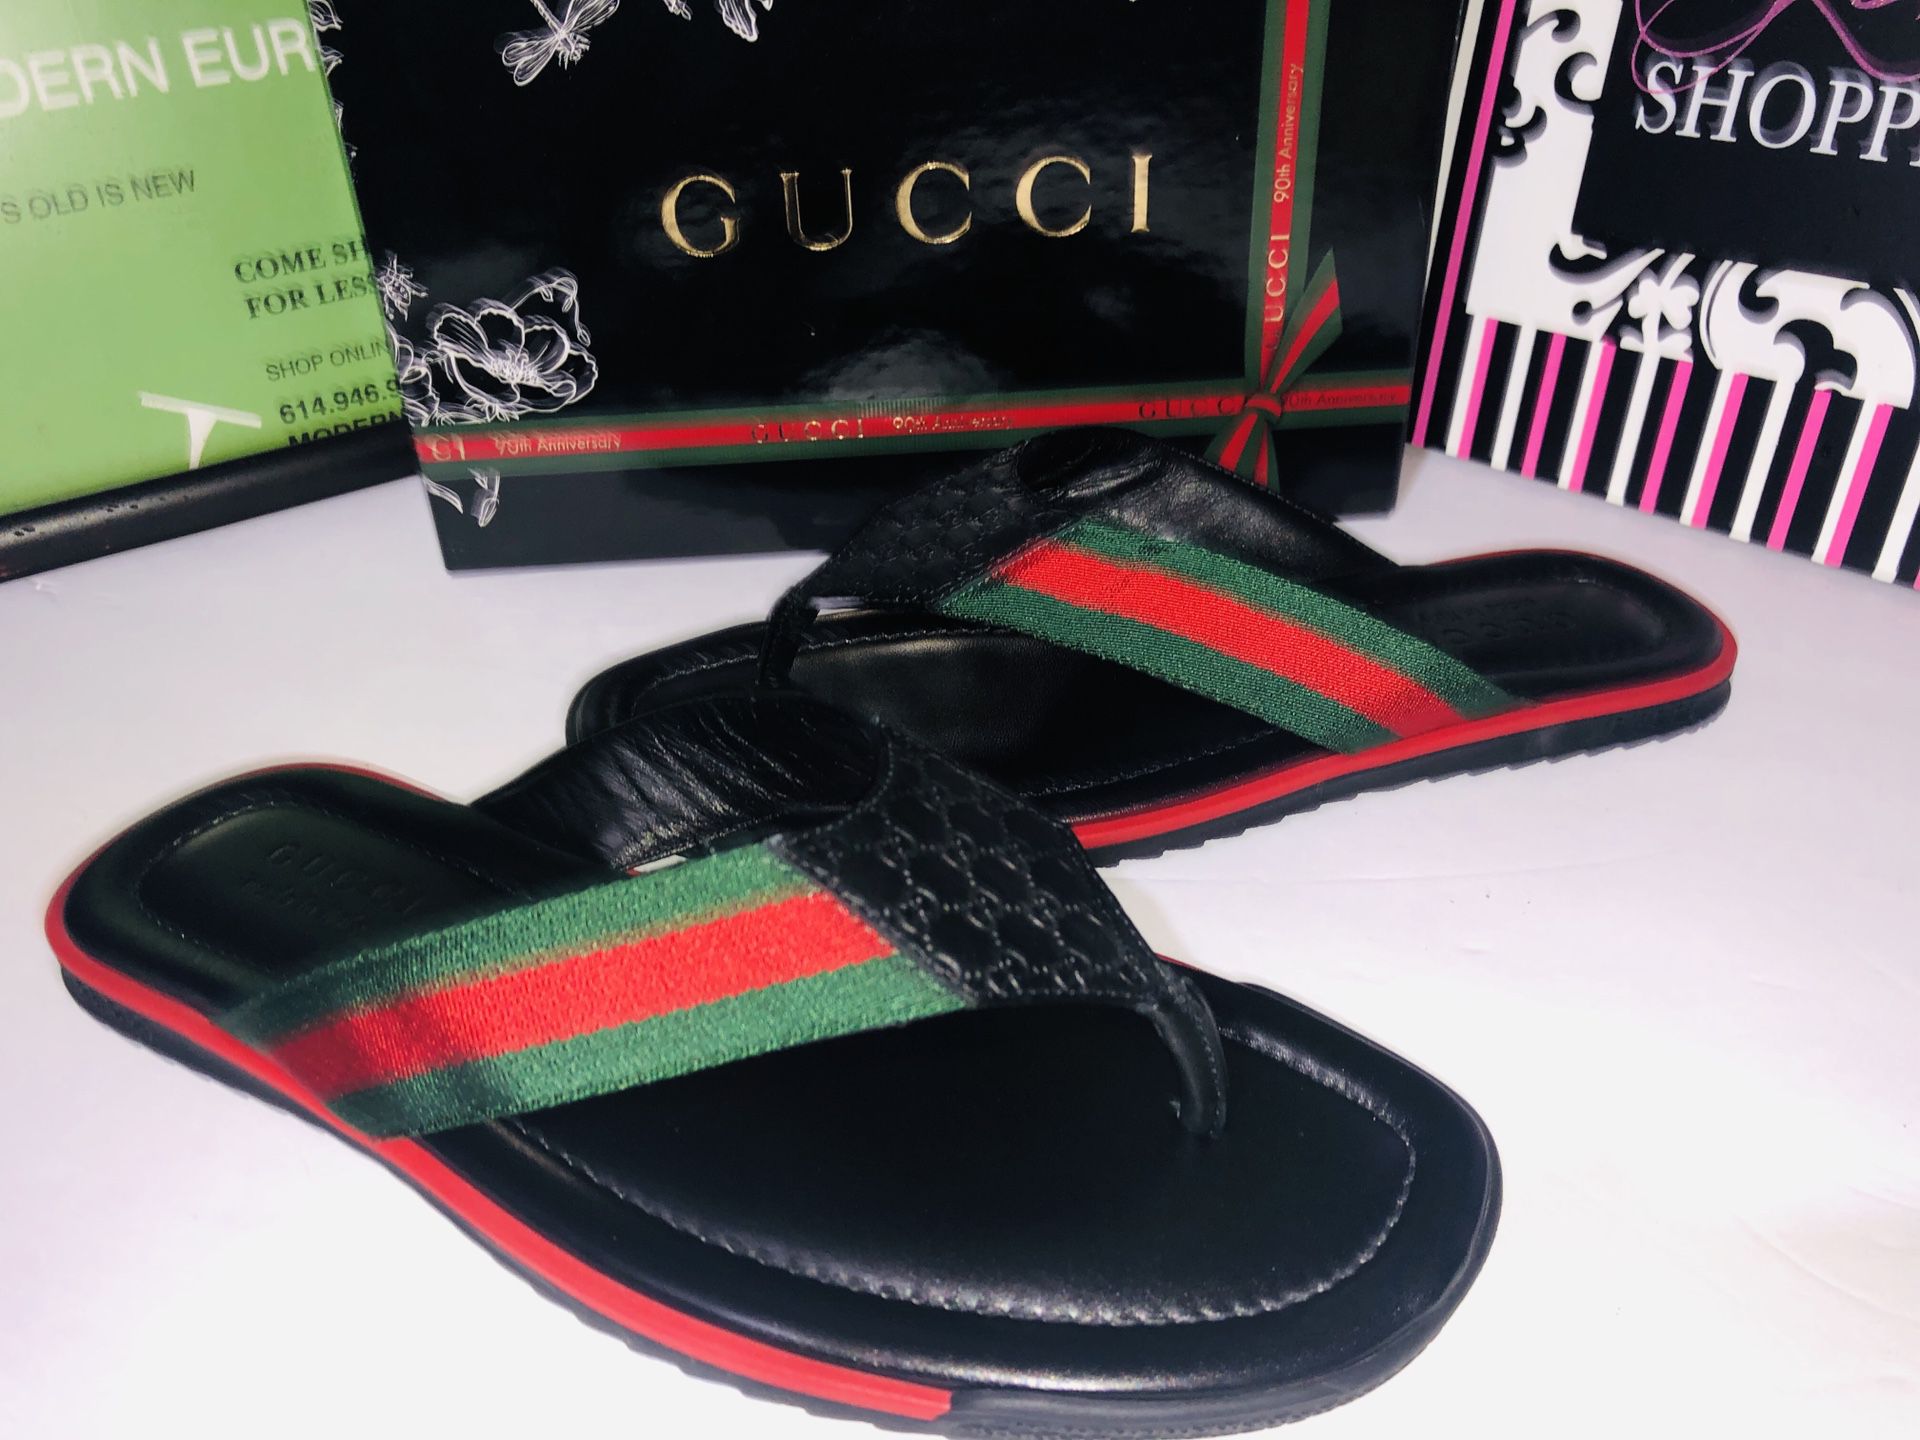 Gucci thong web embossed sandals size 9 new